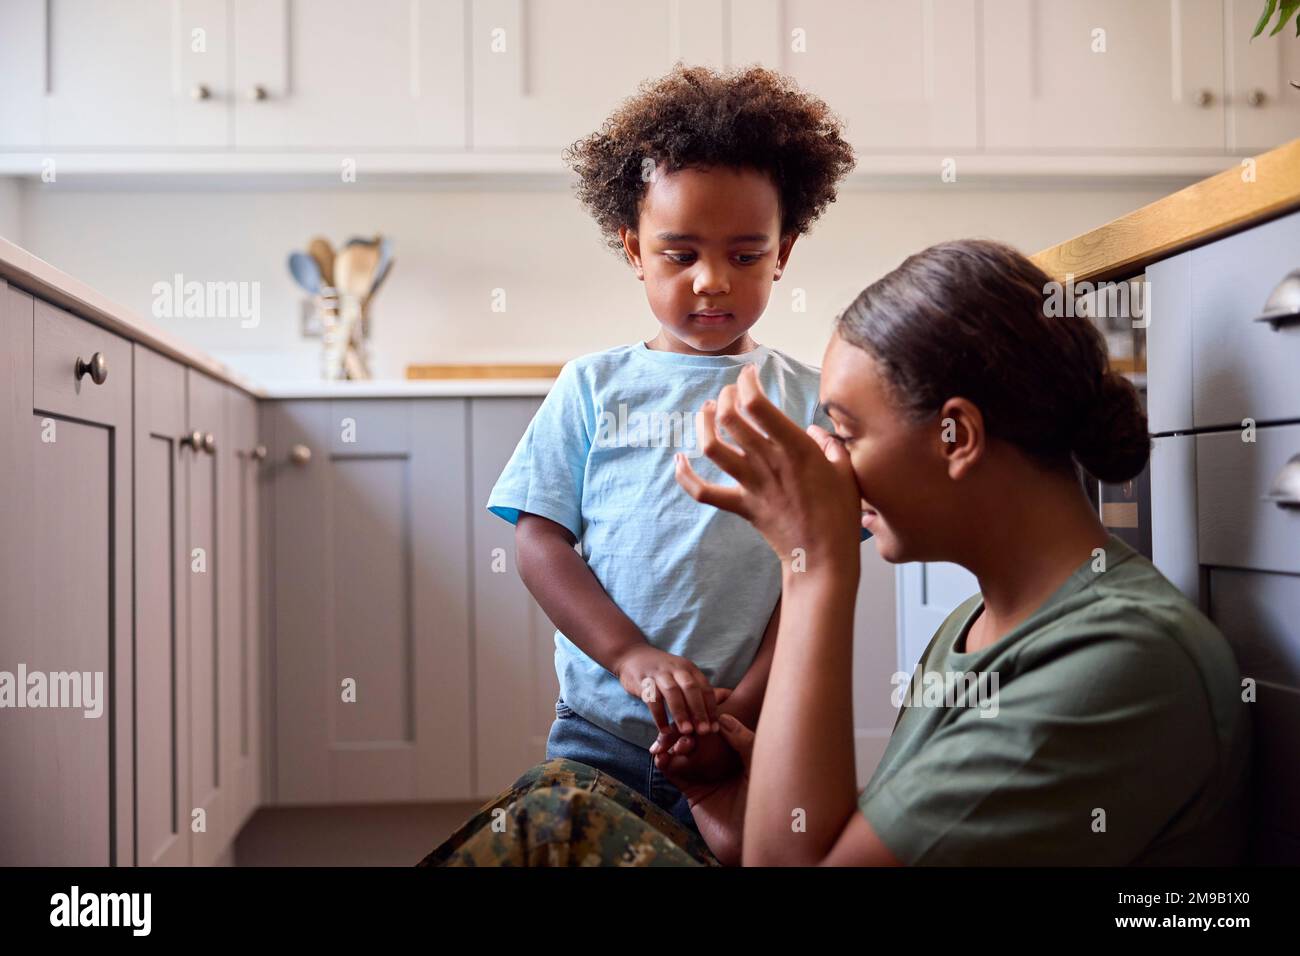 Young Son Comforting Depressed Mother In Uniform Suffering With PTSD Sitting On Floor On Home Leave Stock Photo